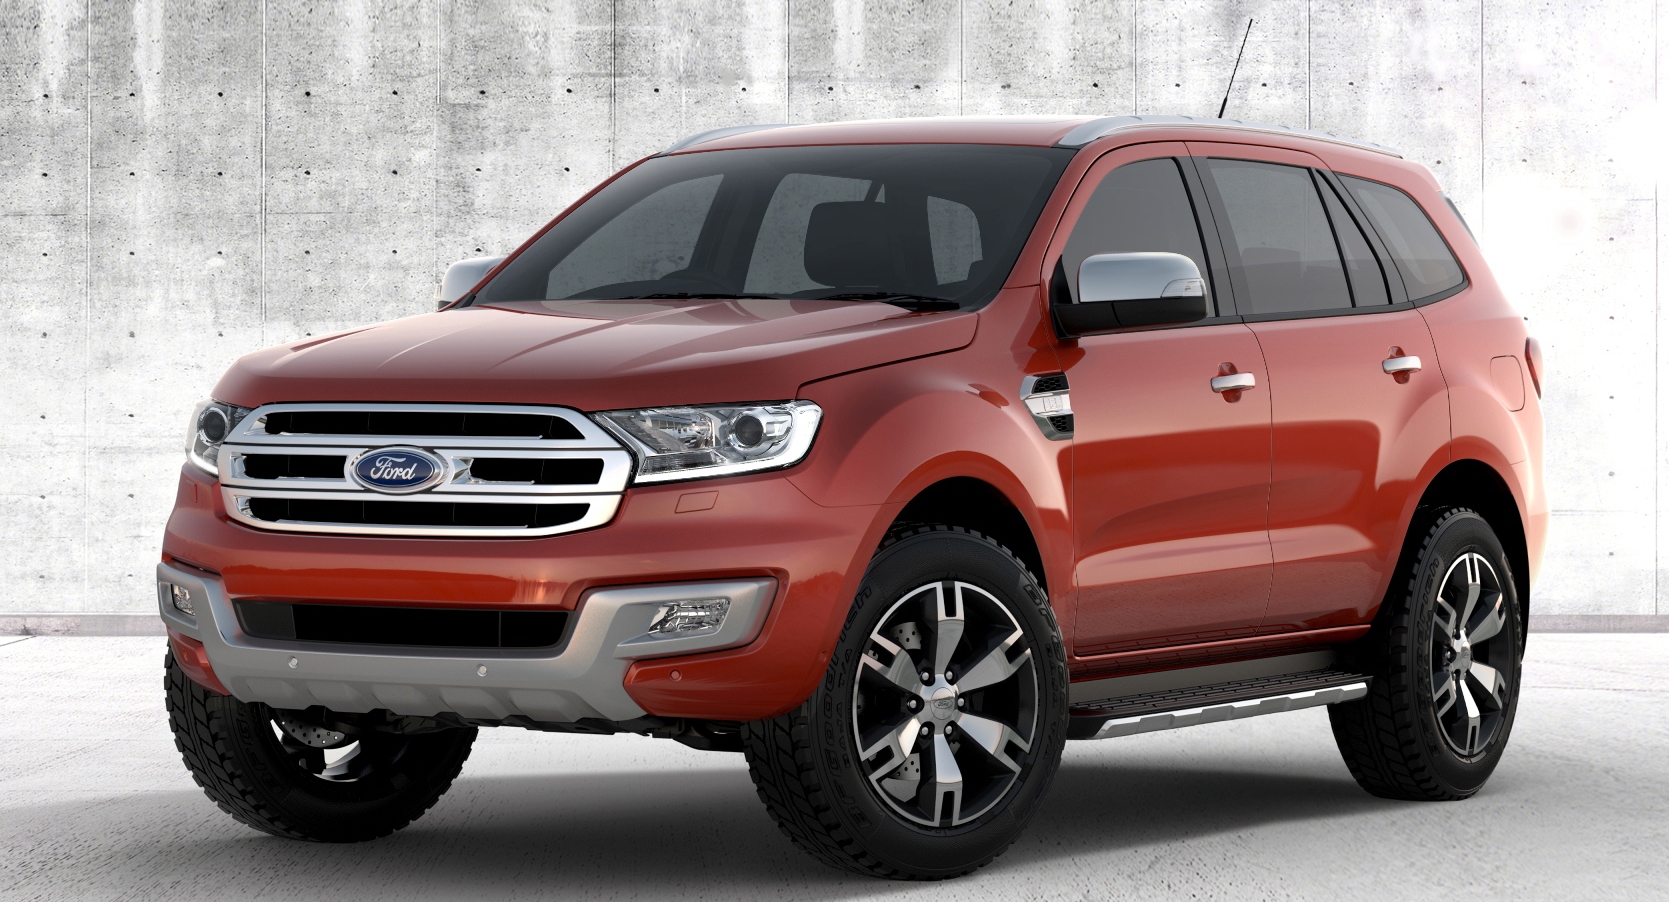 2015 Ford Everest unveiled - to get 2.0L EcoBoost Ford Everest 01 ...